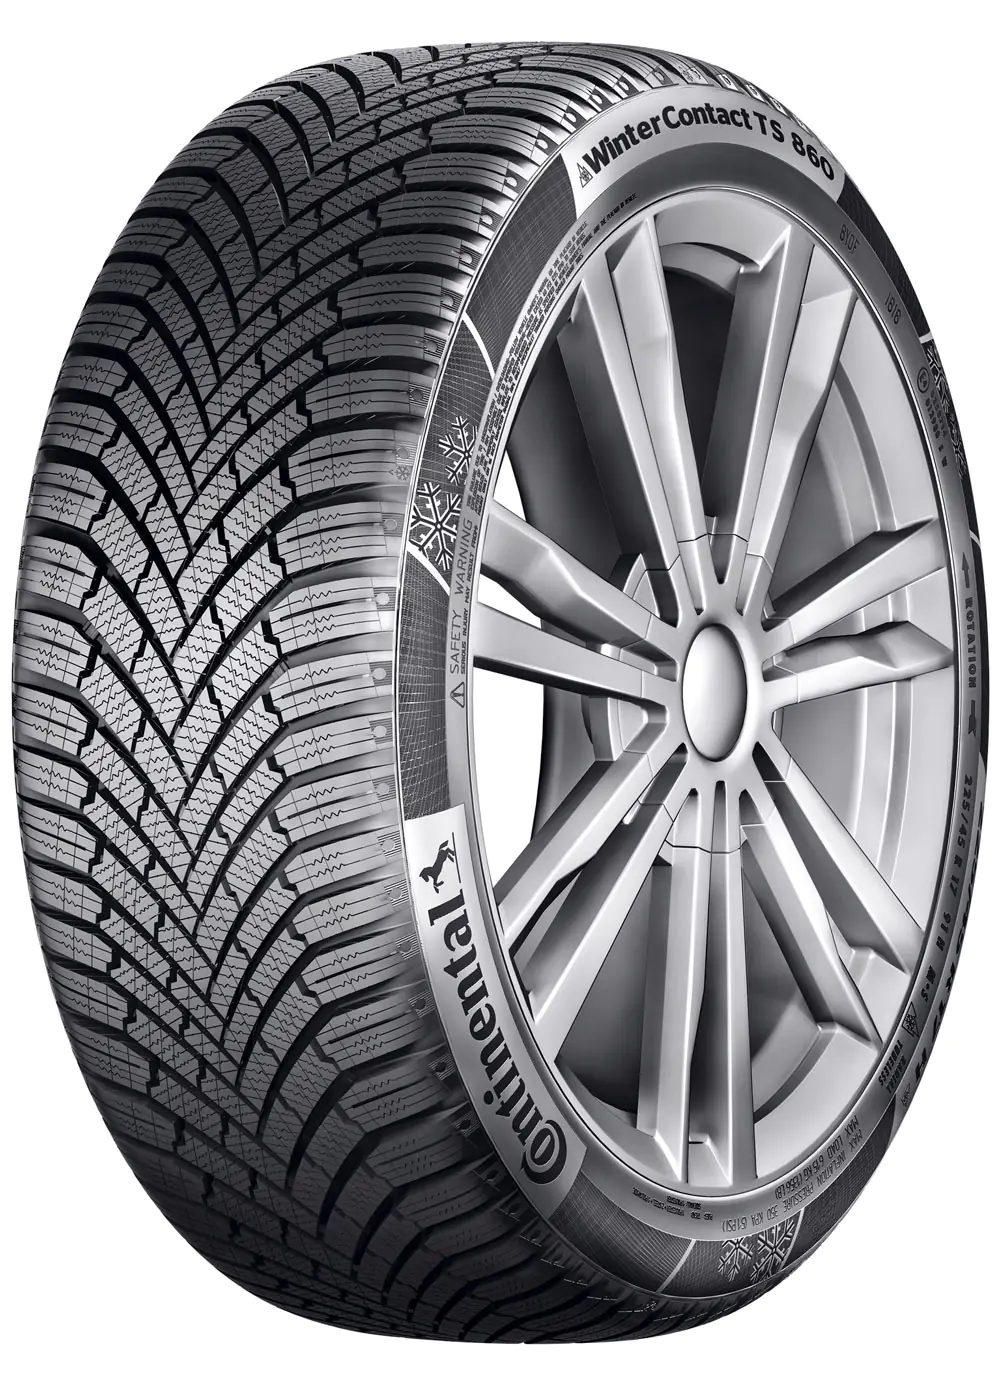 Gomme 4x4 Suv Continental 305/35 R21 109V WINTER CONTACT TS860 N0 XL M+S Invernale